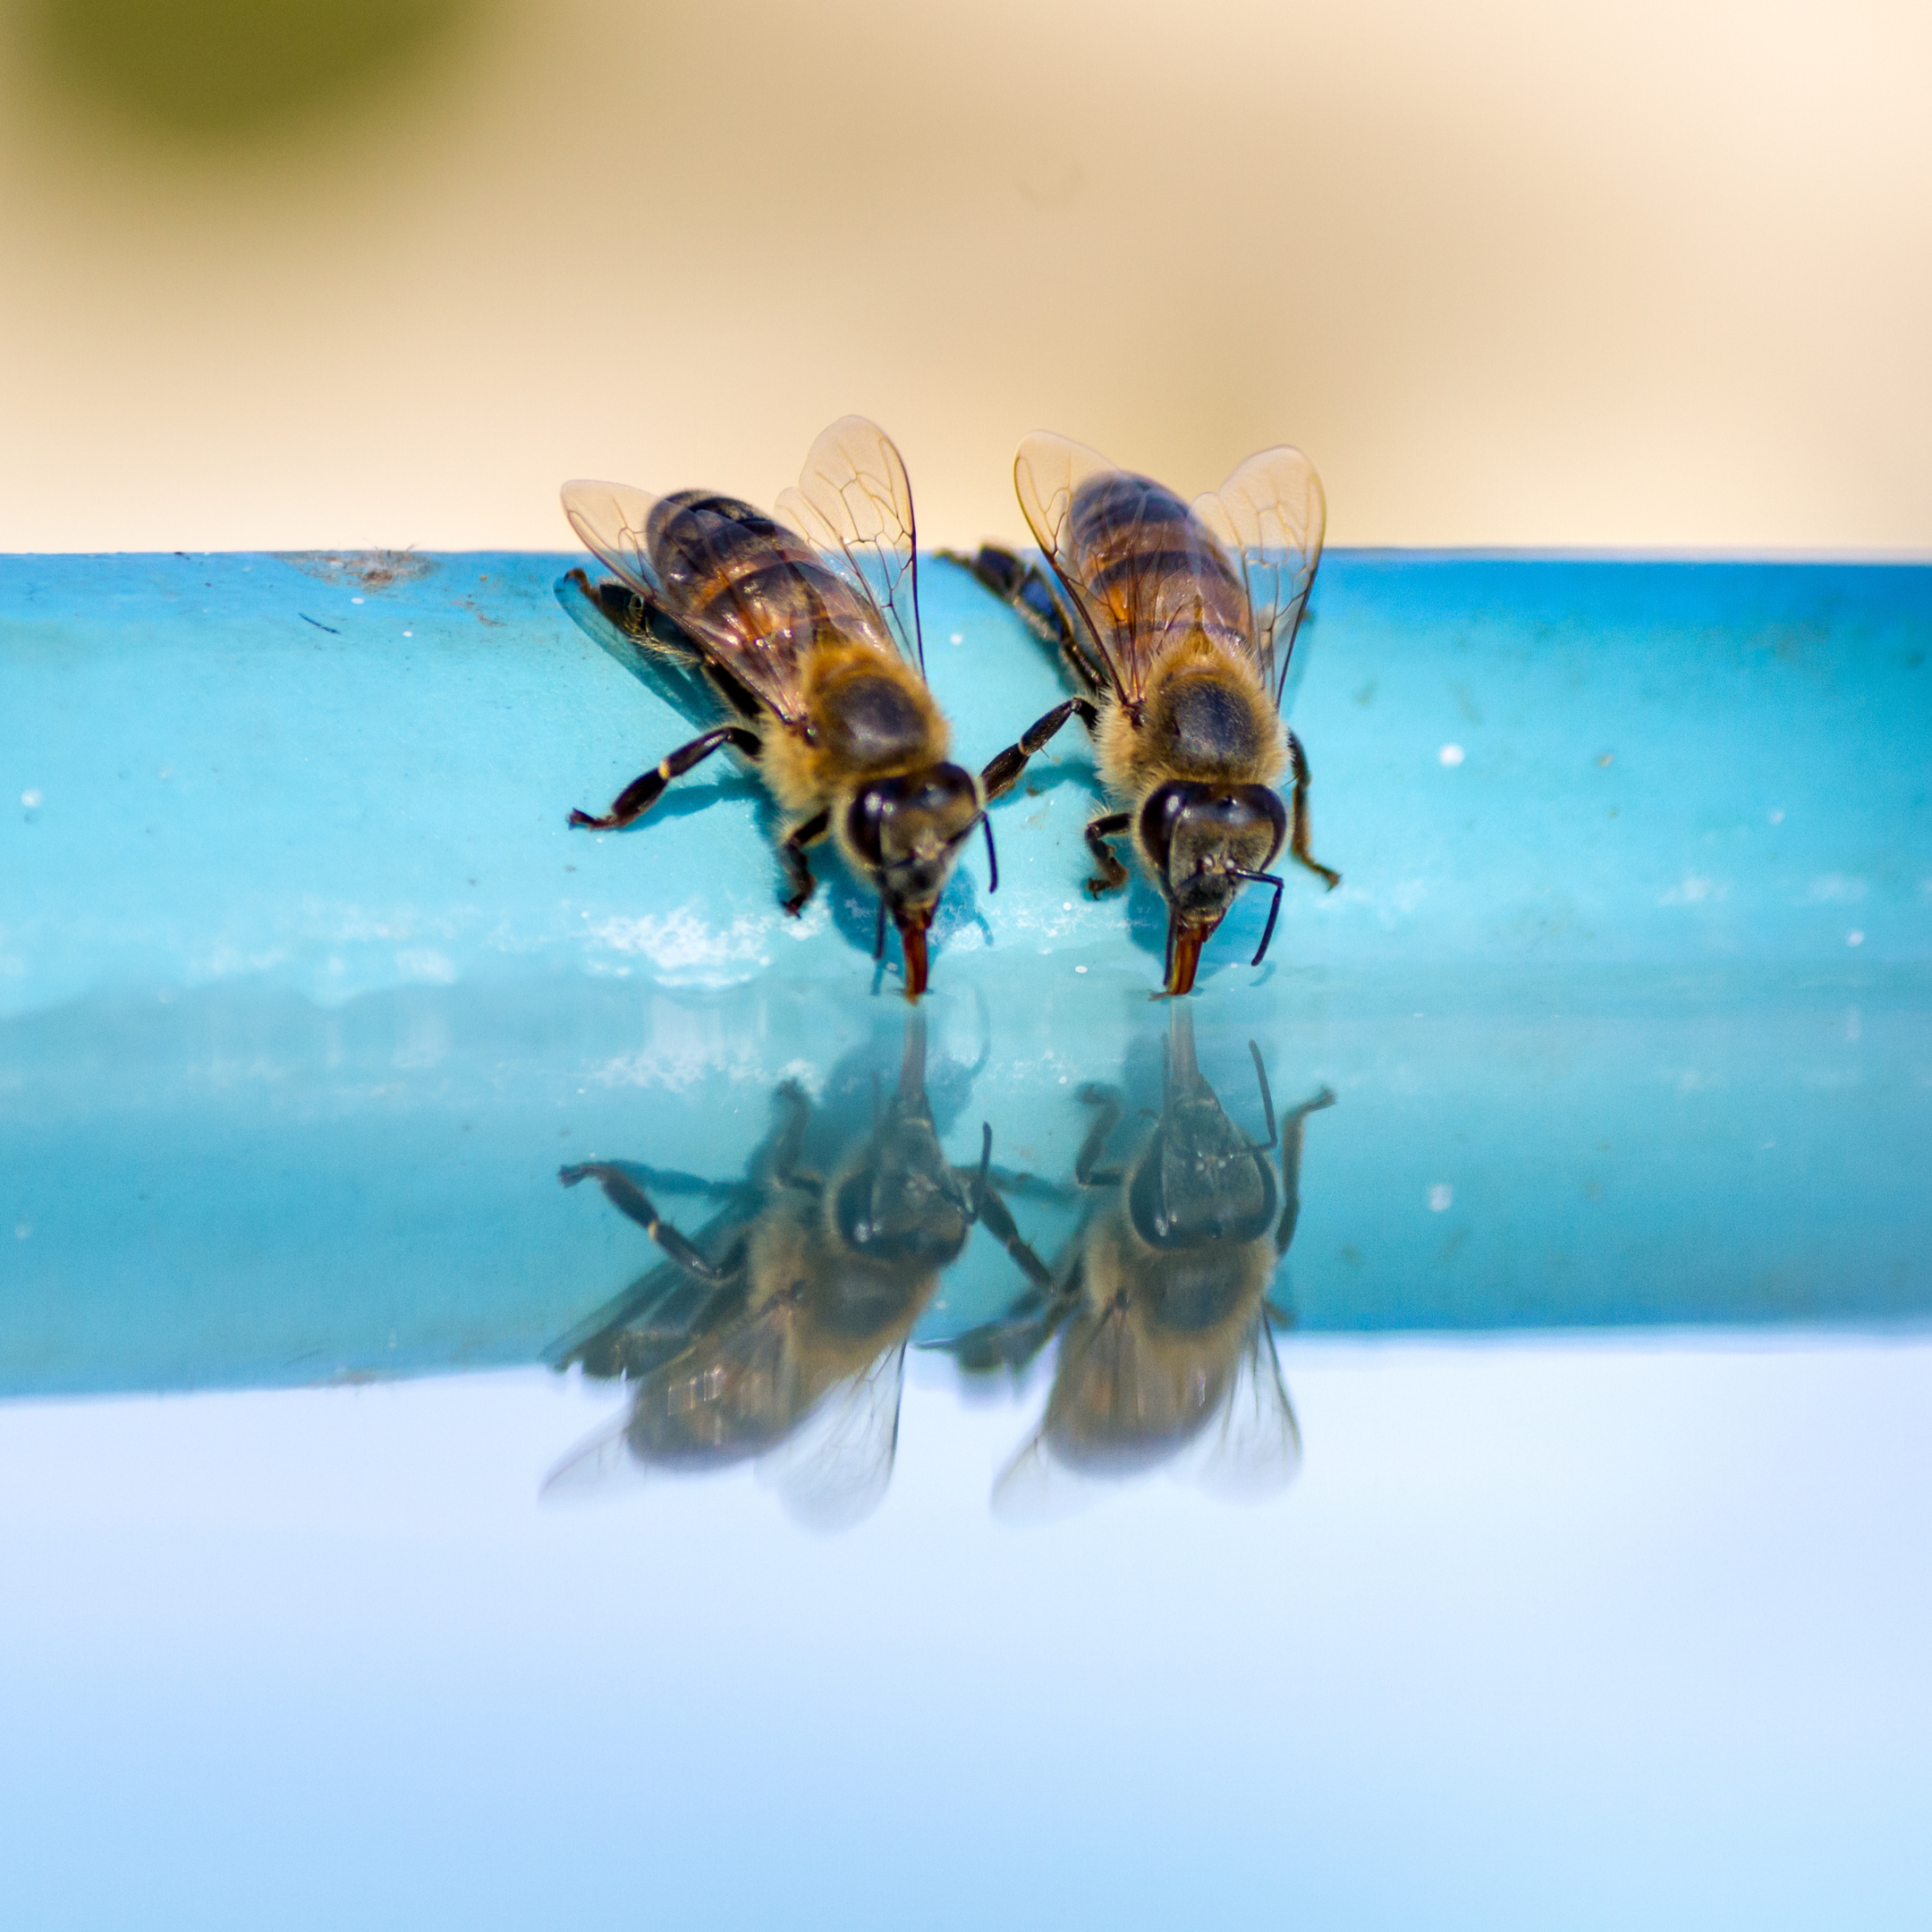 bees sipping water